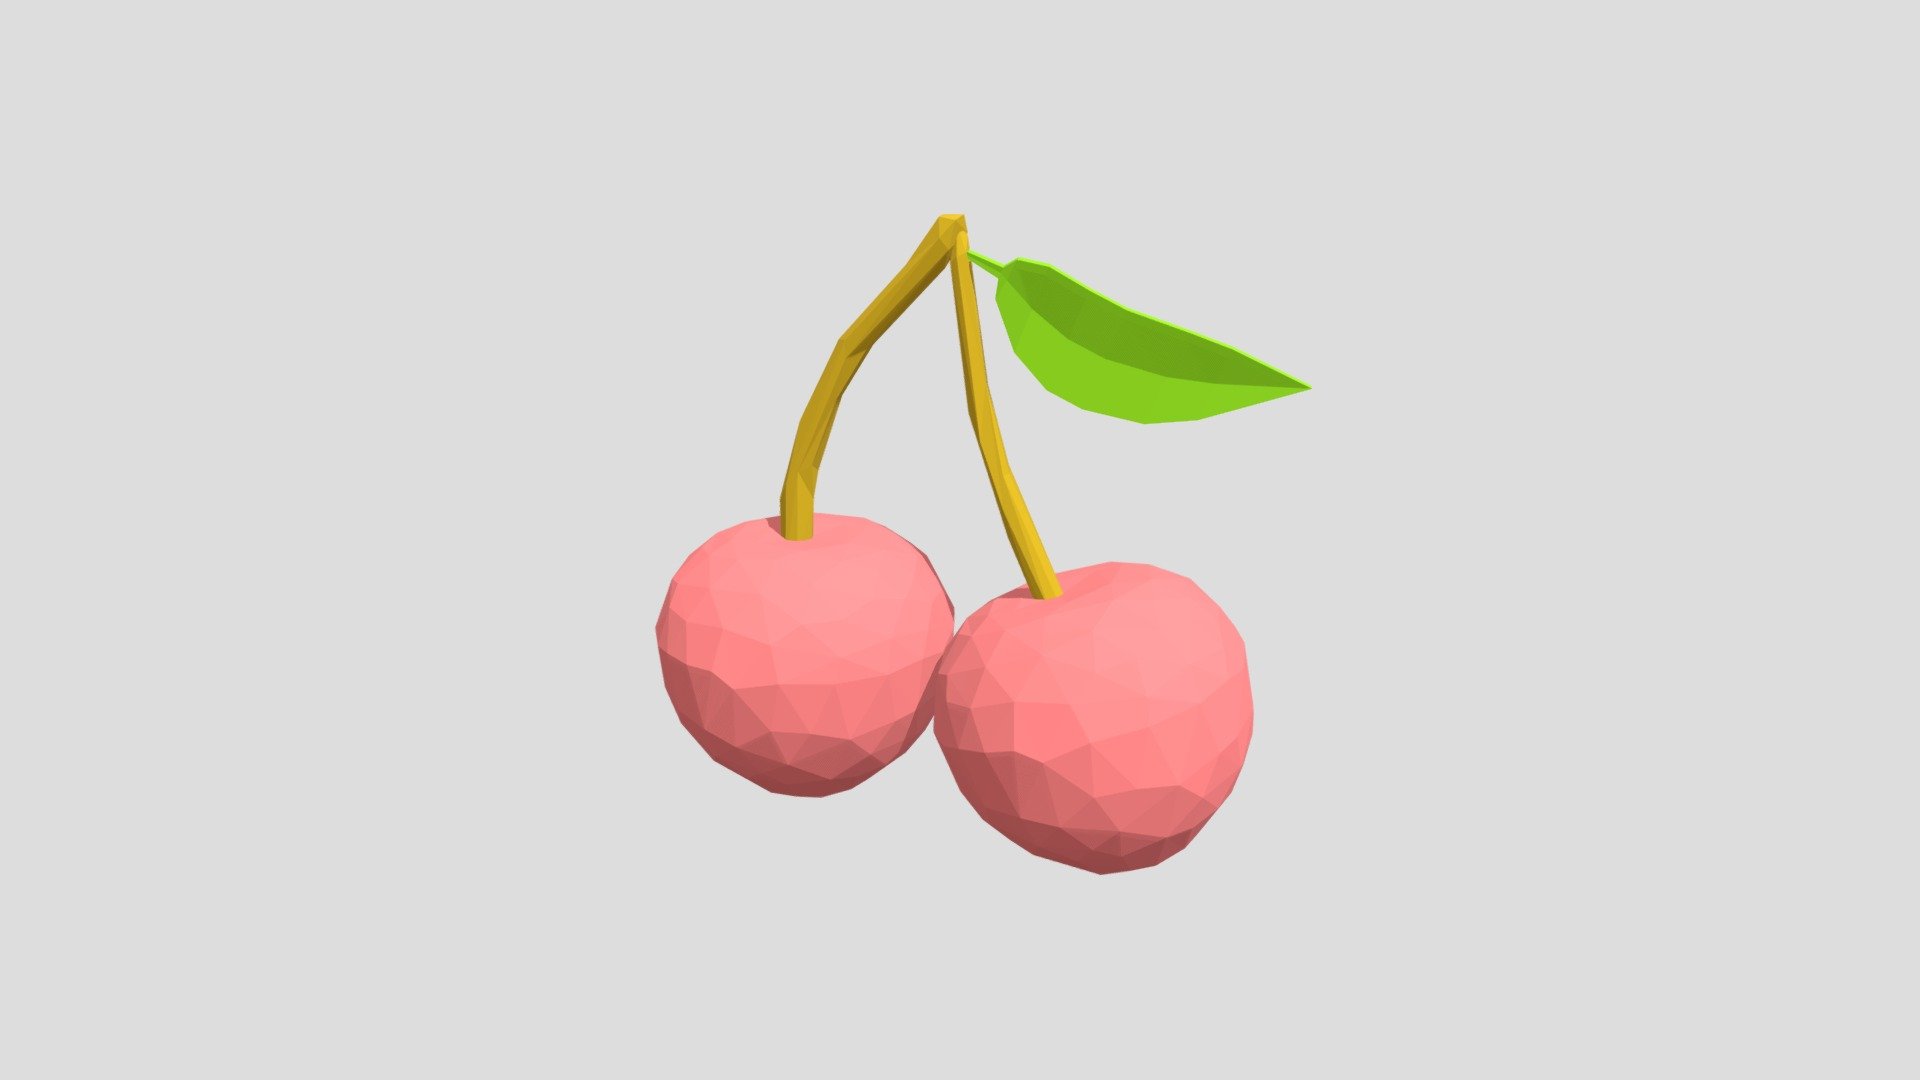 Fruits 3D, 2+ colors, Low-Poly

Crated with Cinema4d

Game Ready - Cherry - Download Free 3D model by HanSoloSnipe 3d model